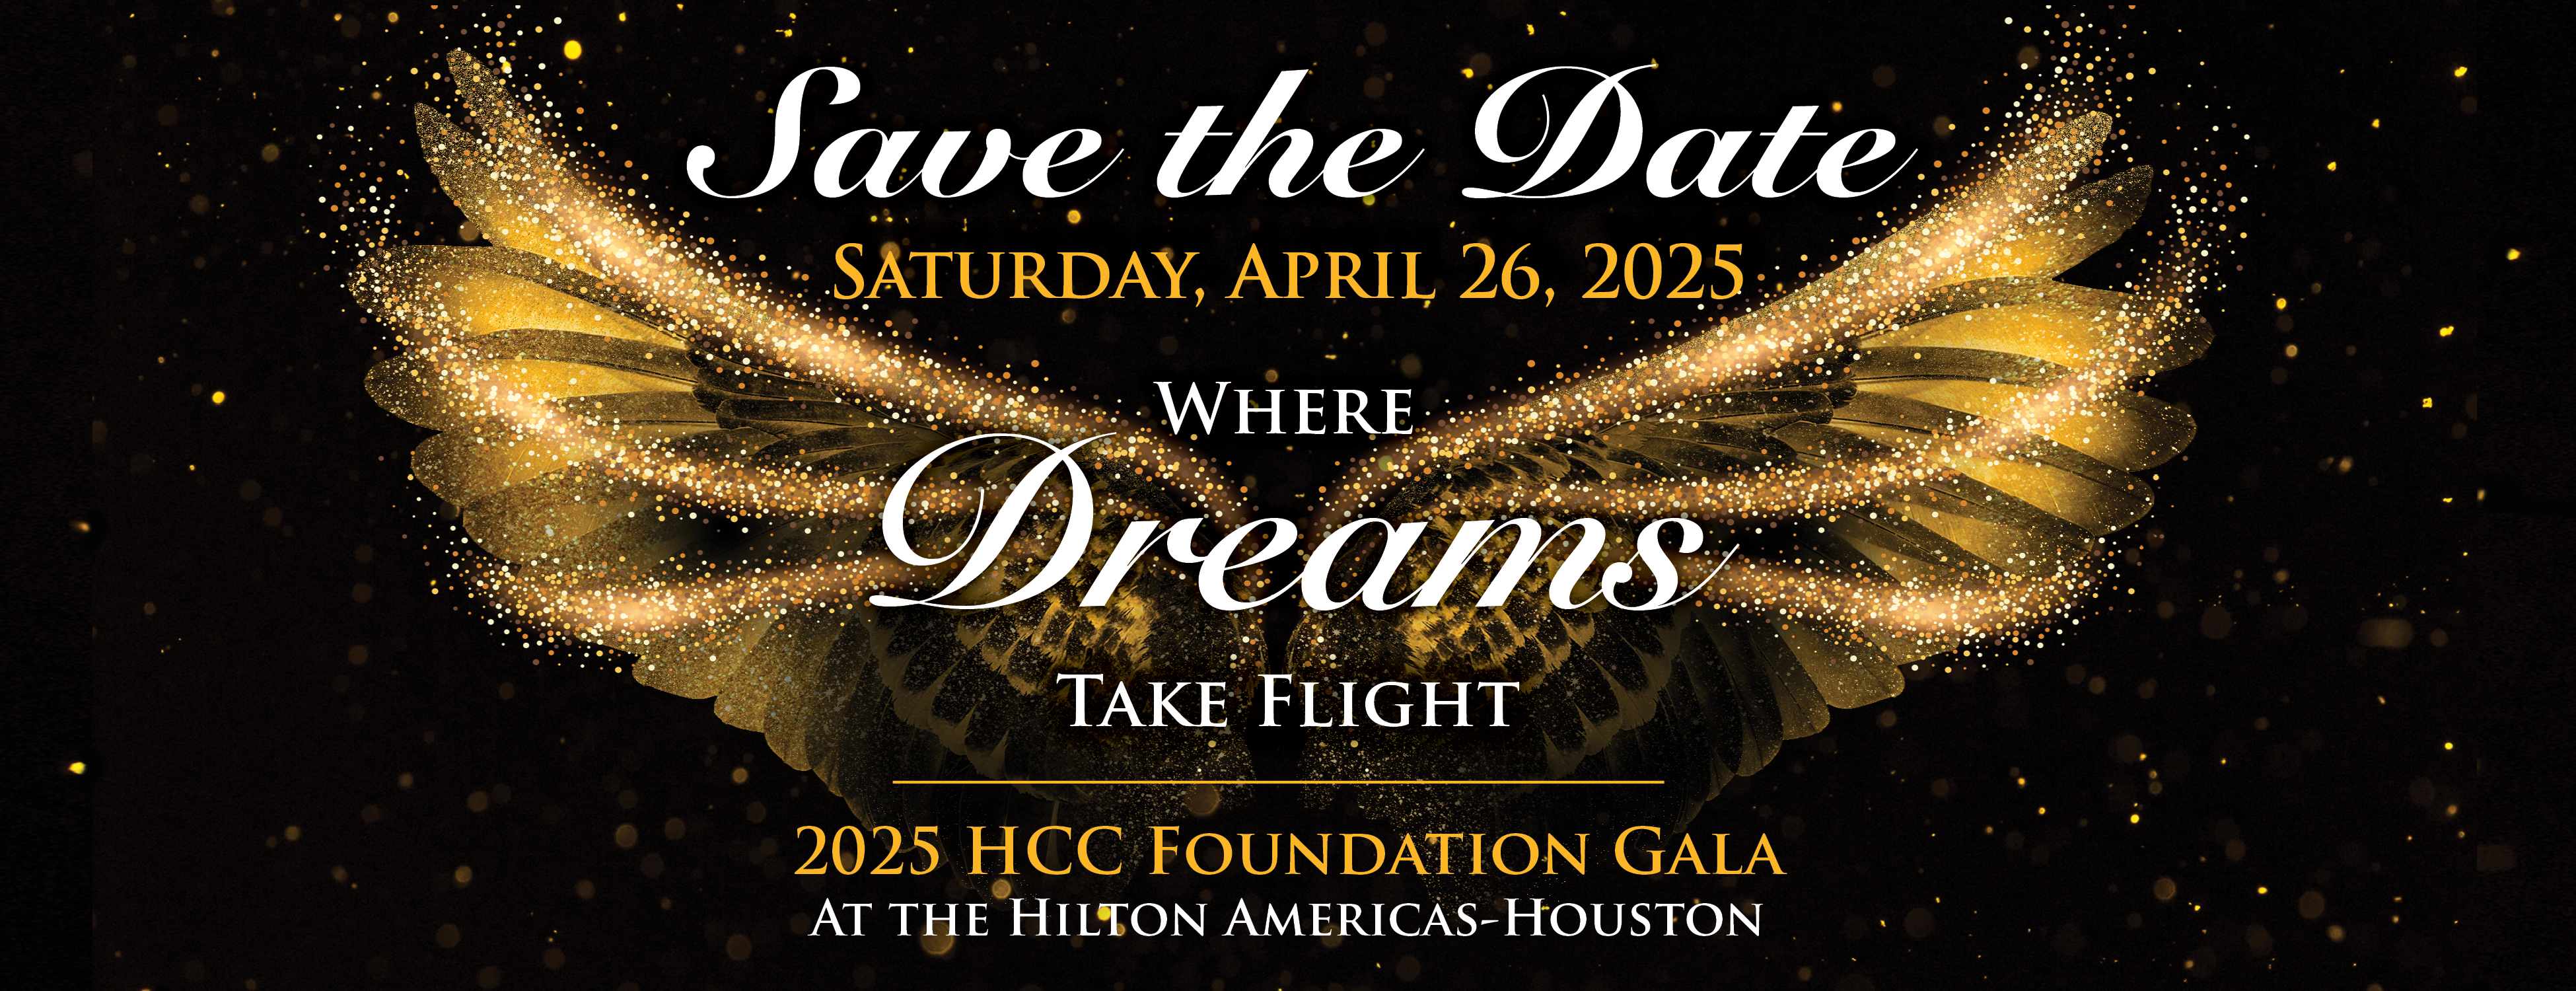 2025 HCCF Gala Save the Date Web Banner RESIZED